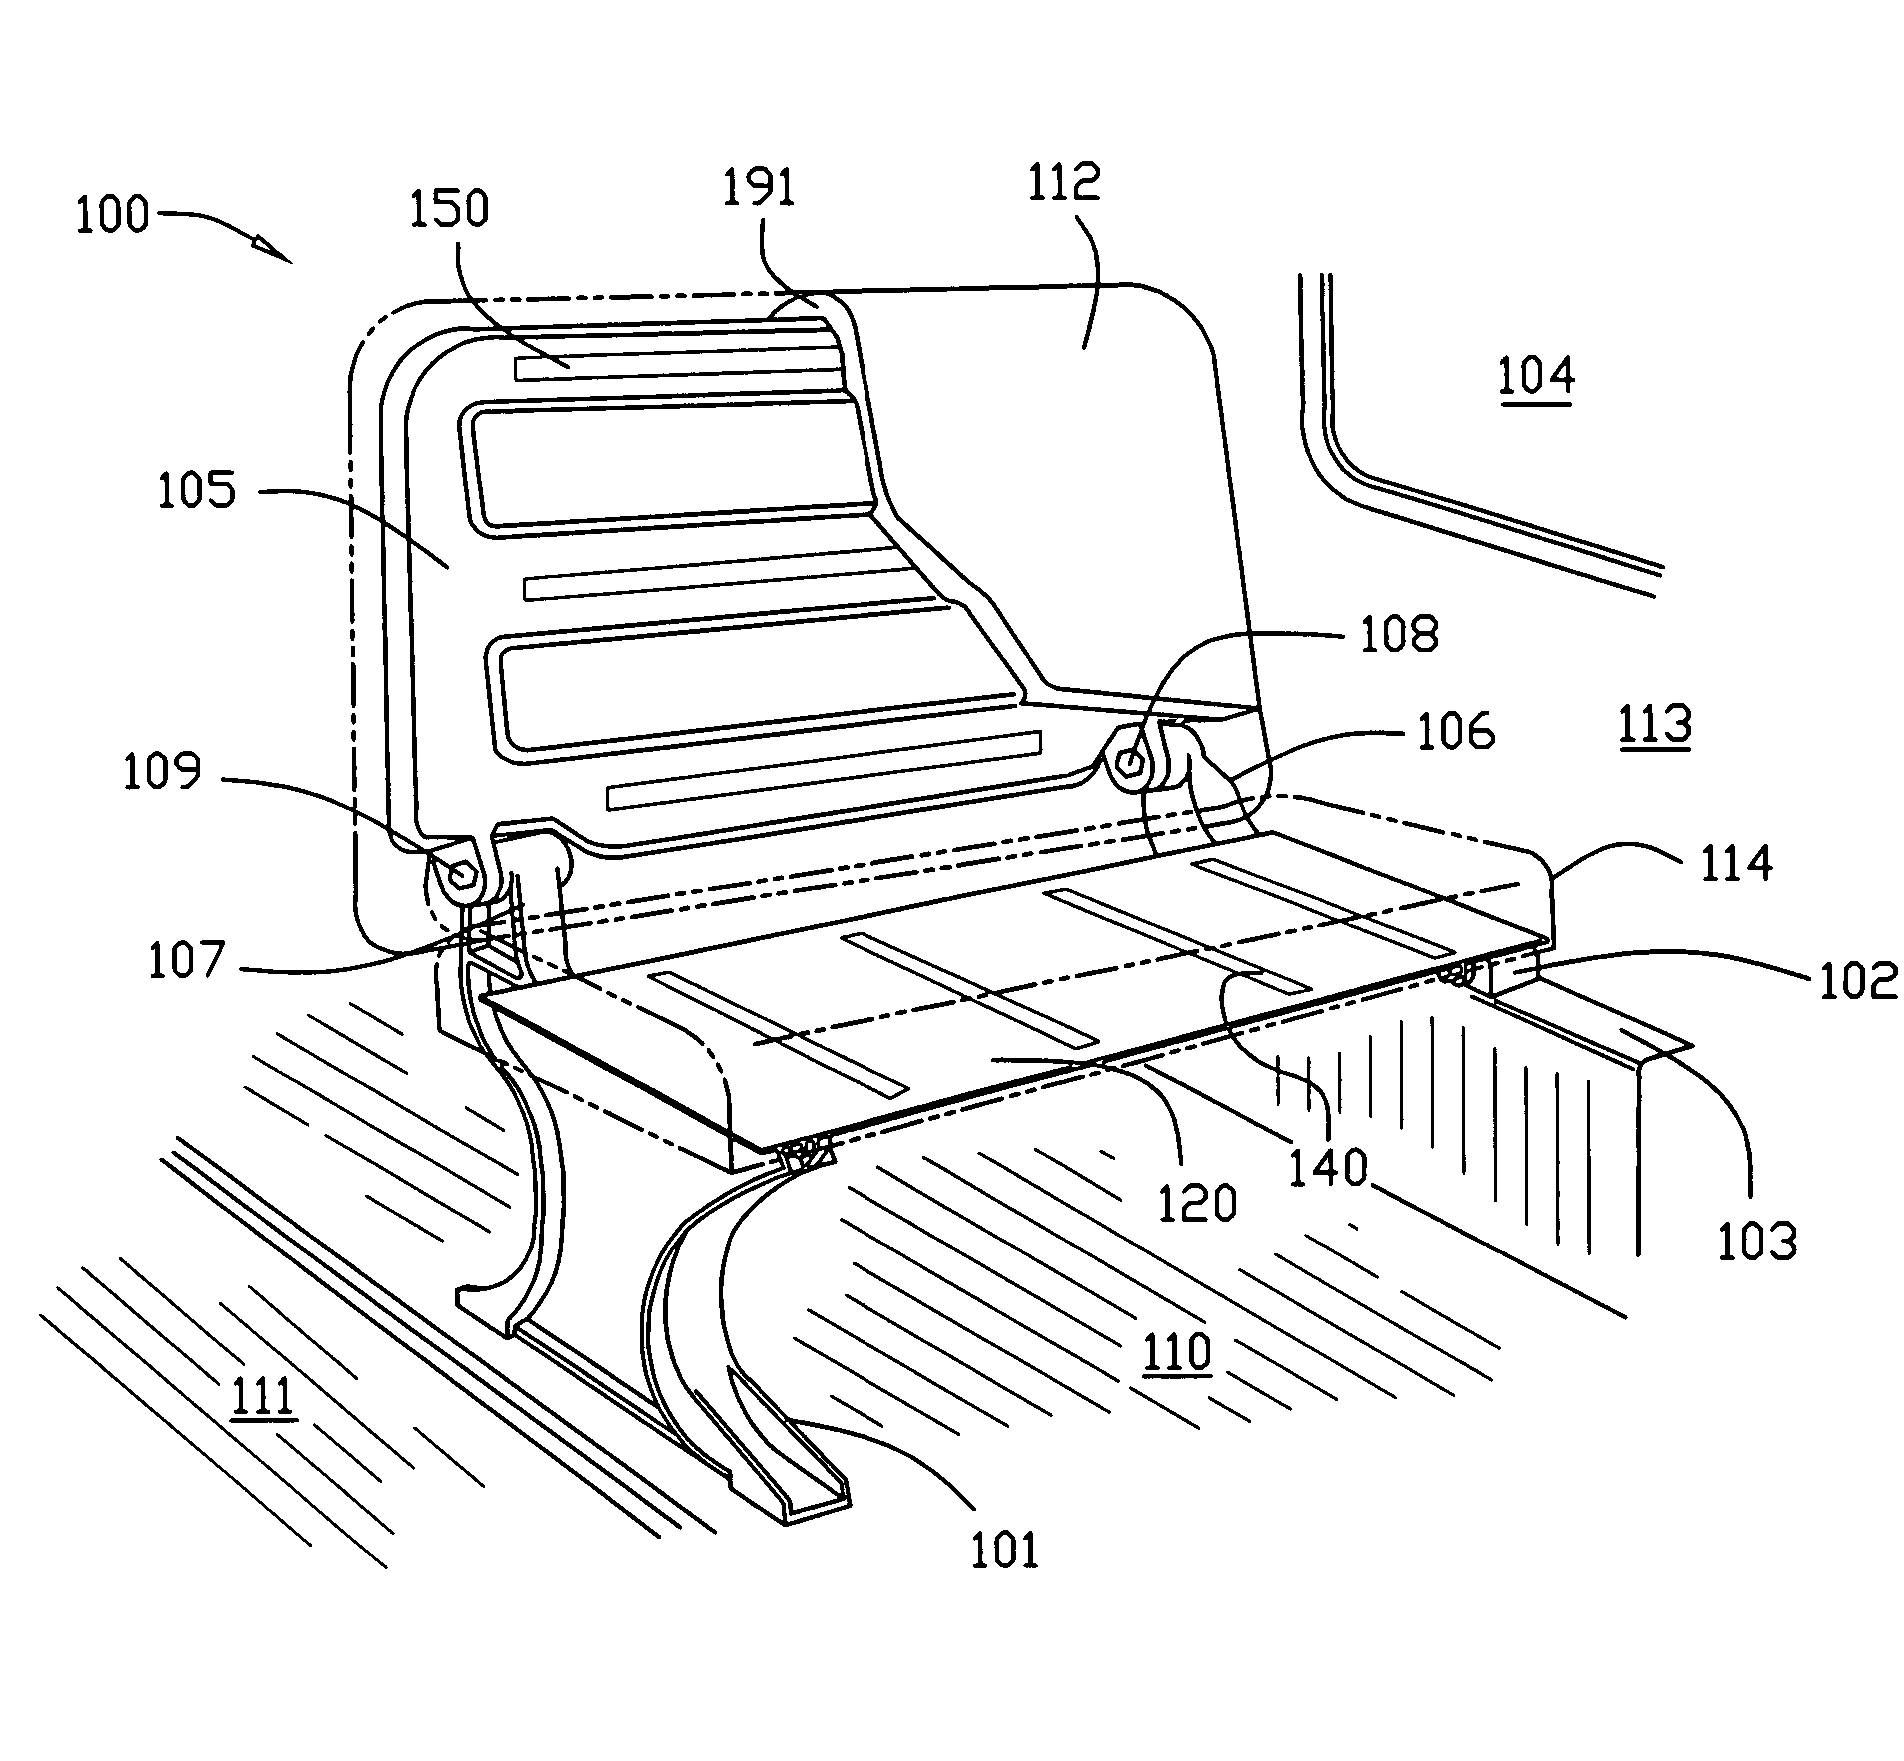 School bus seat with energy absorber